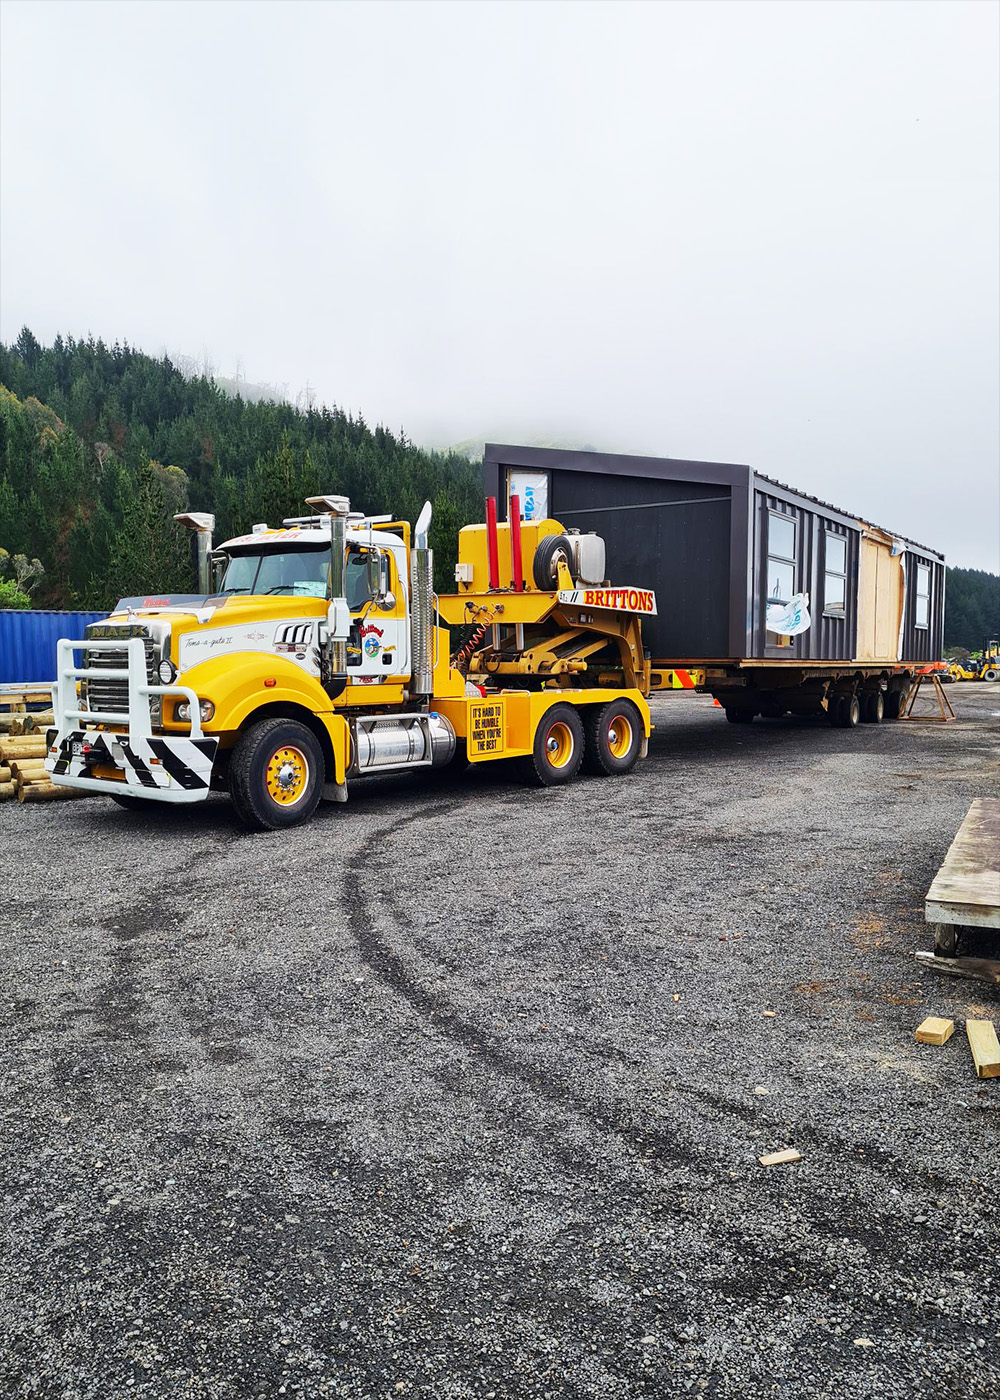 Truck with completed building on board leaves assembly site to transport to customer's site.